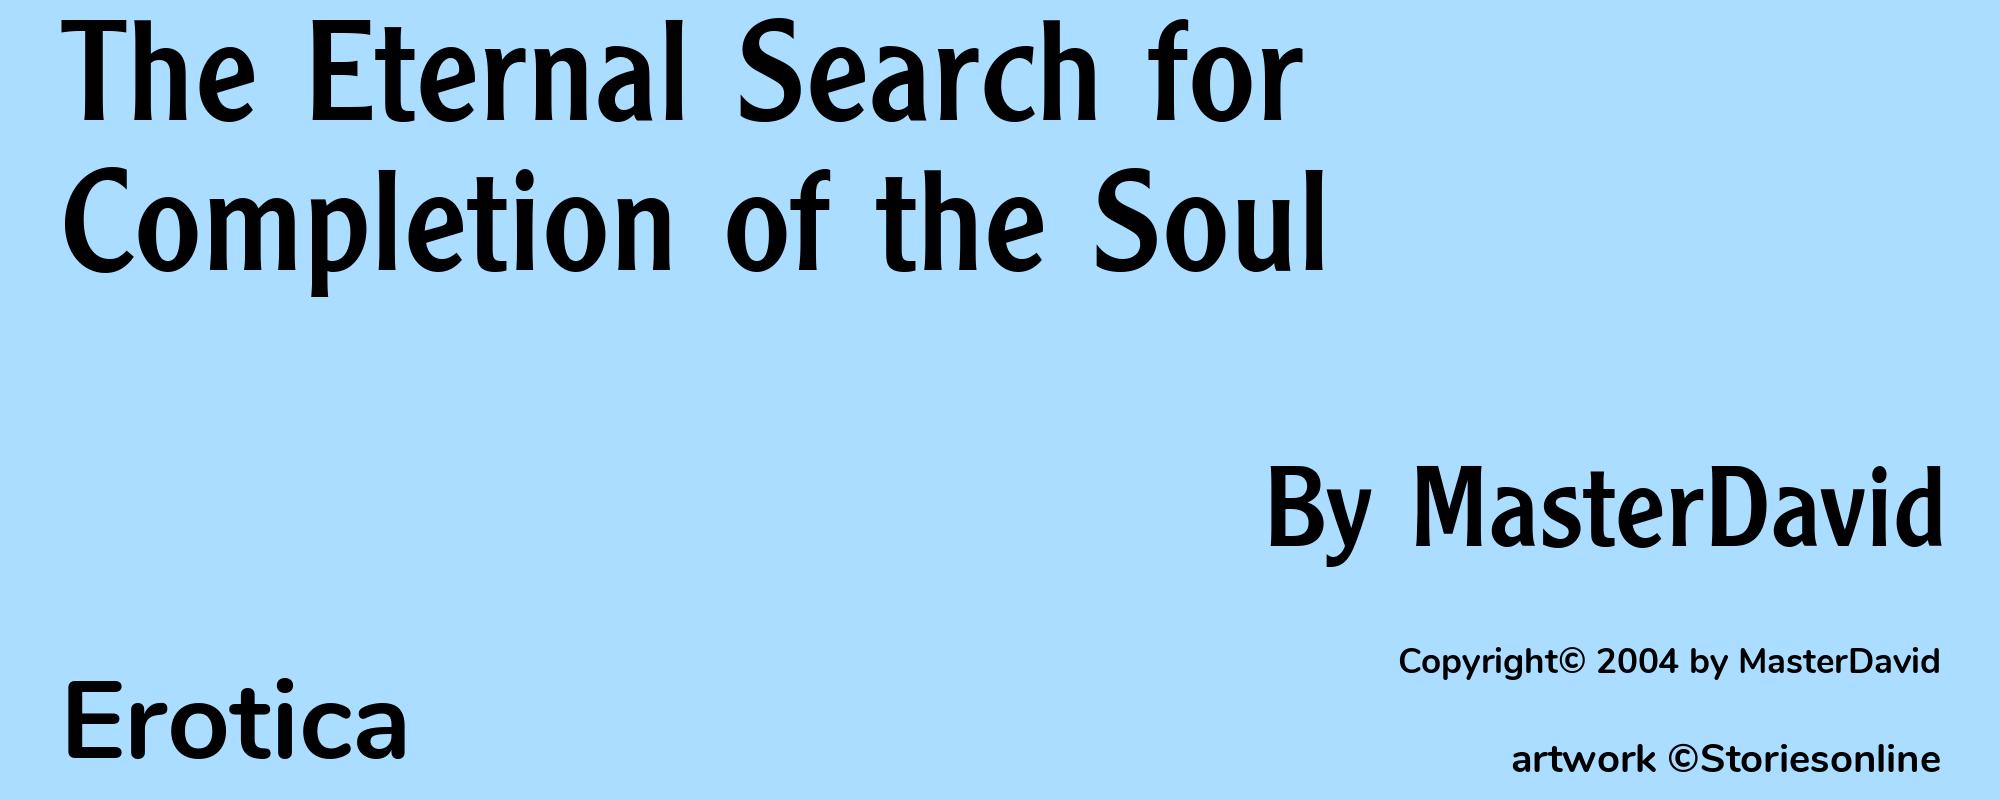 The Eternal Search for Completion of the Soul - Cover